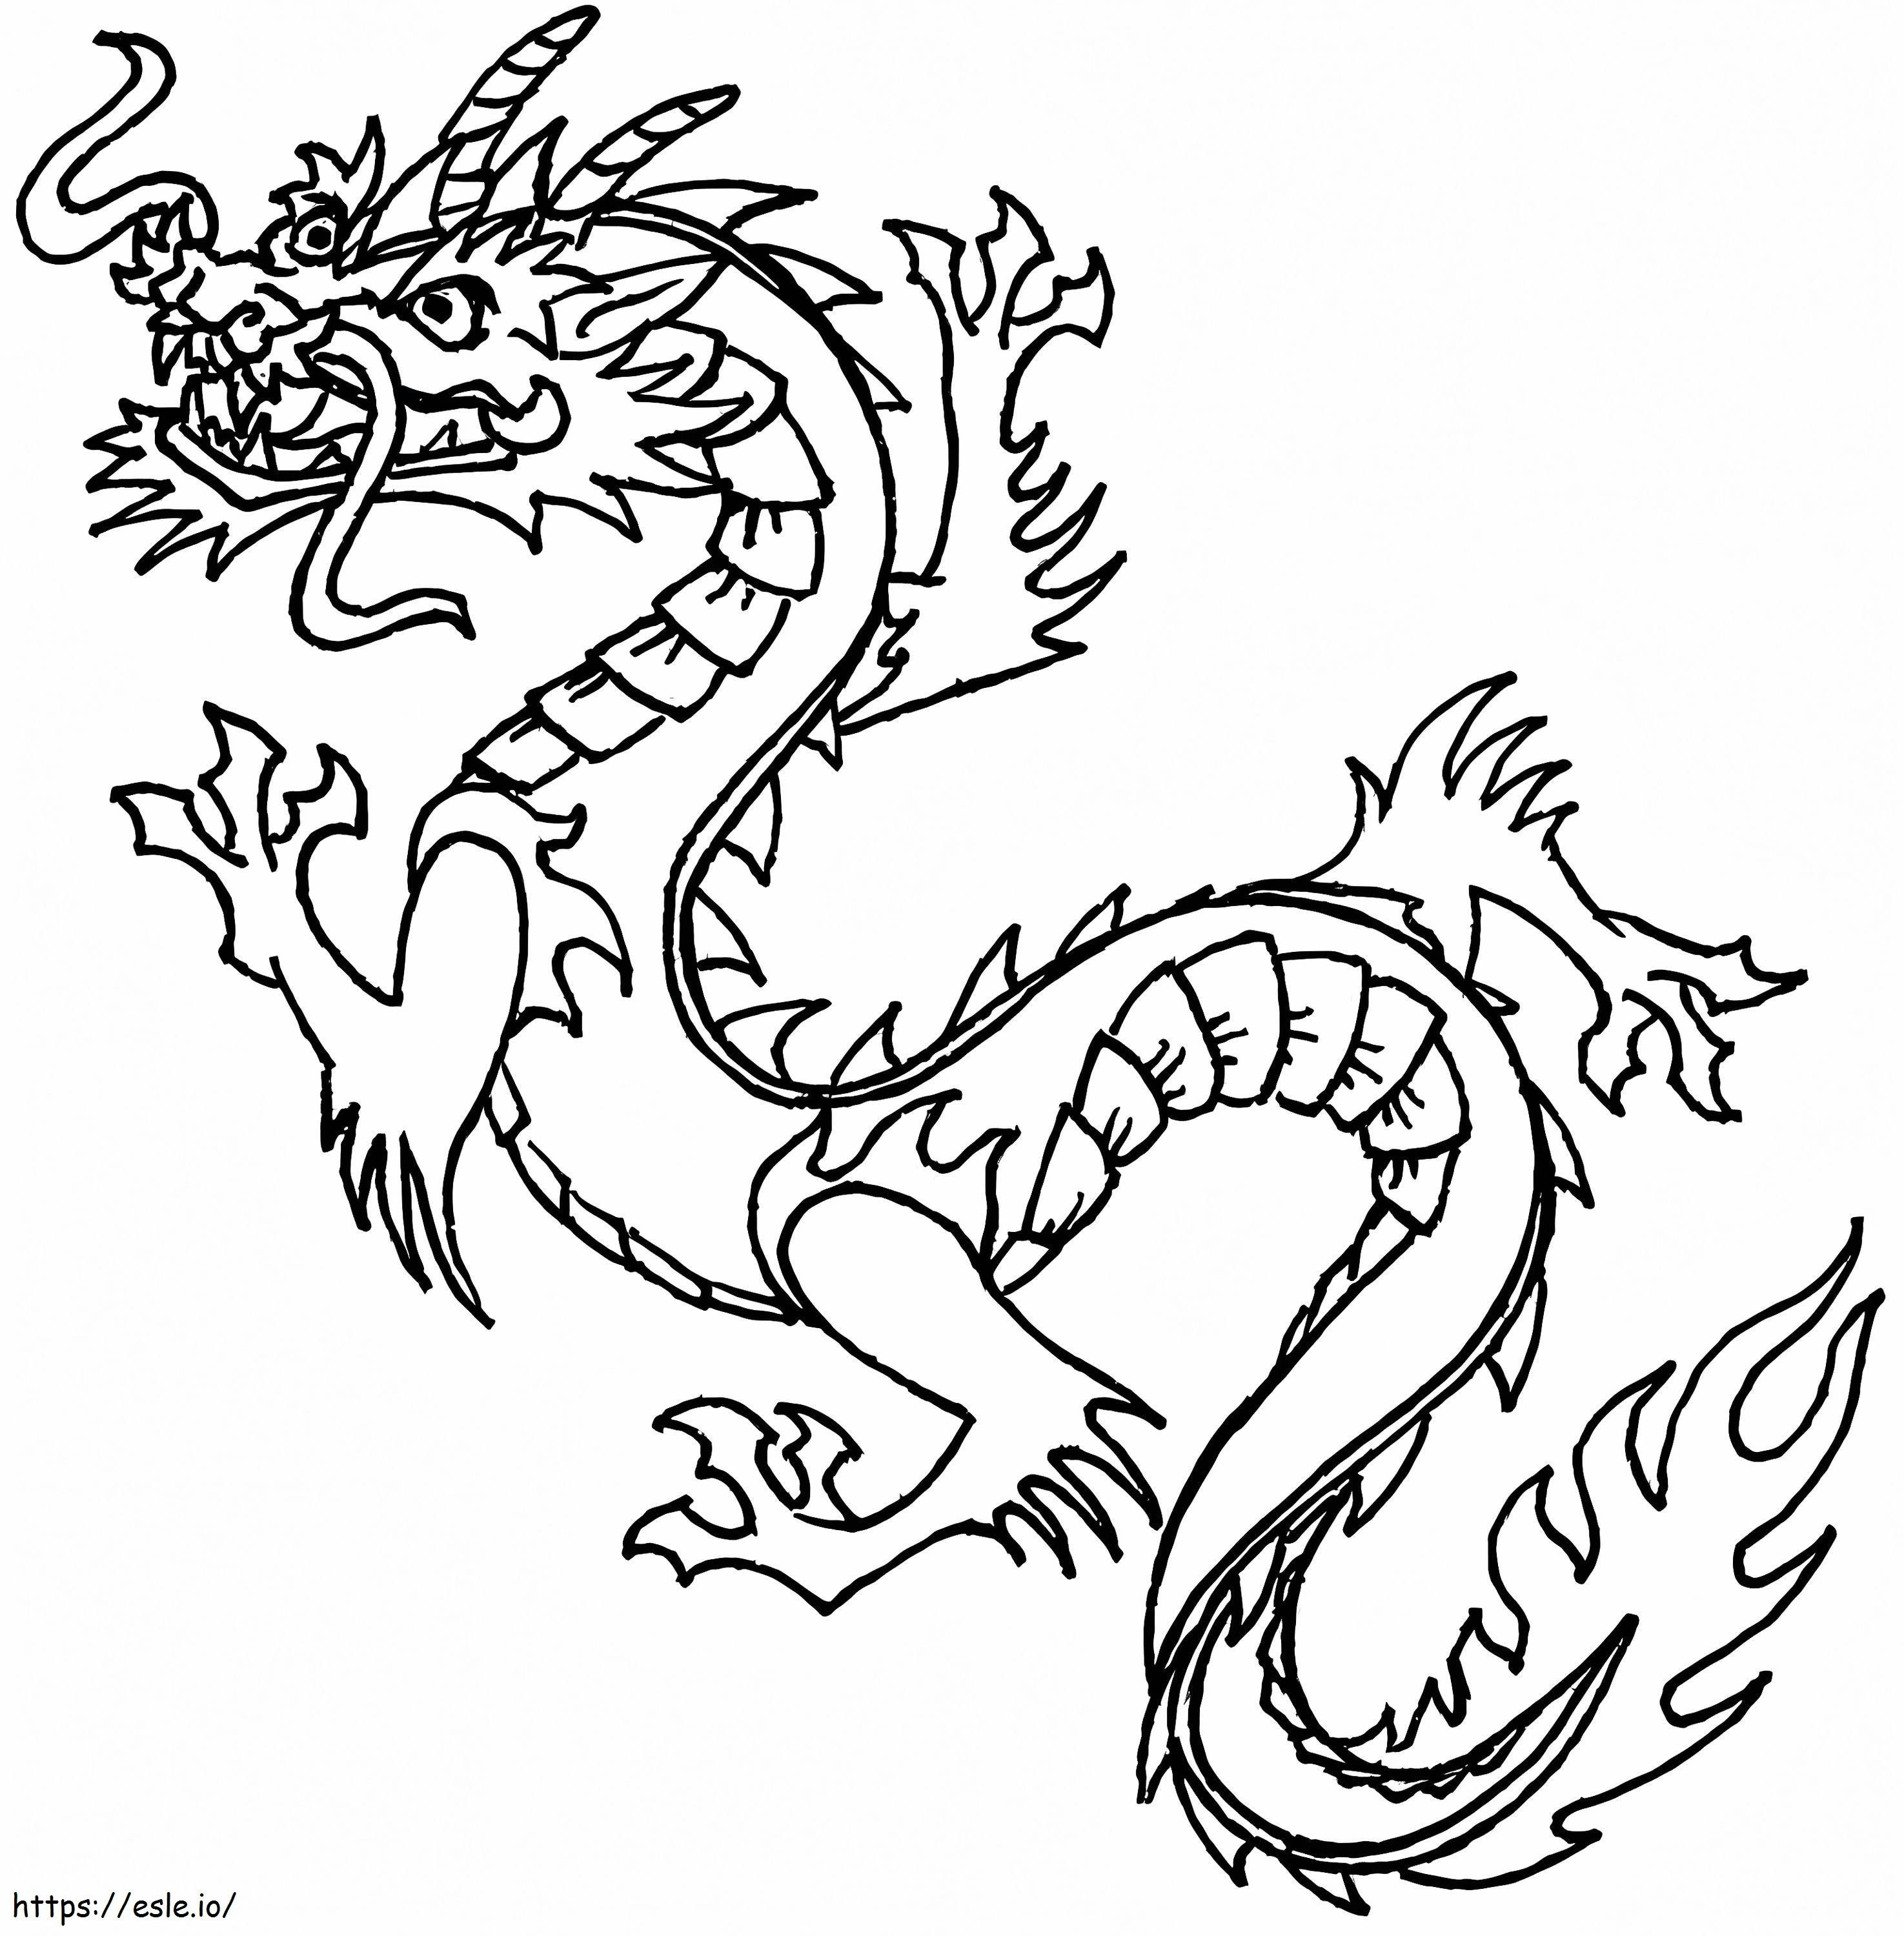 Angry Chinese Dragon coloring page